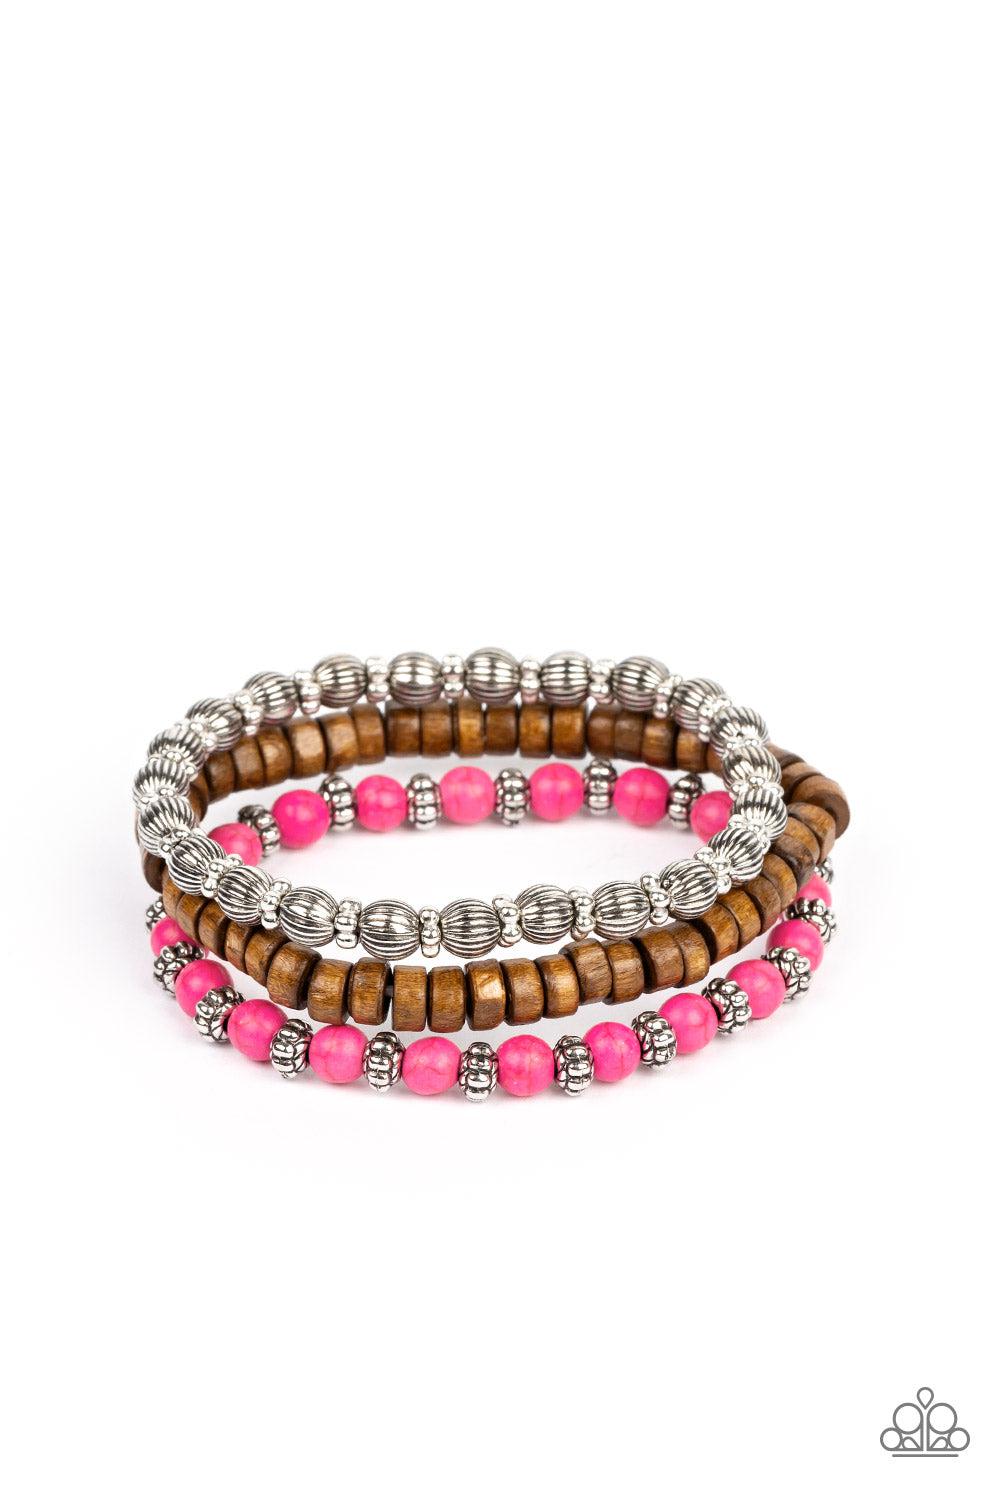 ESCAPADE Route Pink Stone &amp; Wood Bracelet Set - Paparazzi Accessories- lightbox - CarasShop.com - $5 Jewelry by Cara Jewels